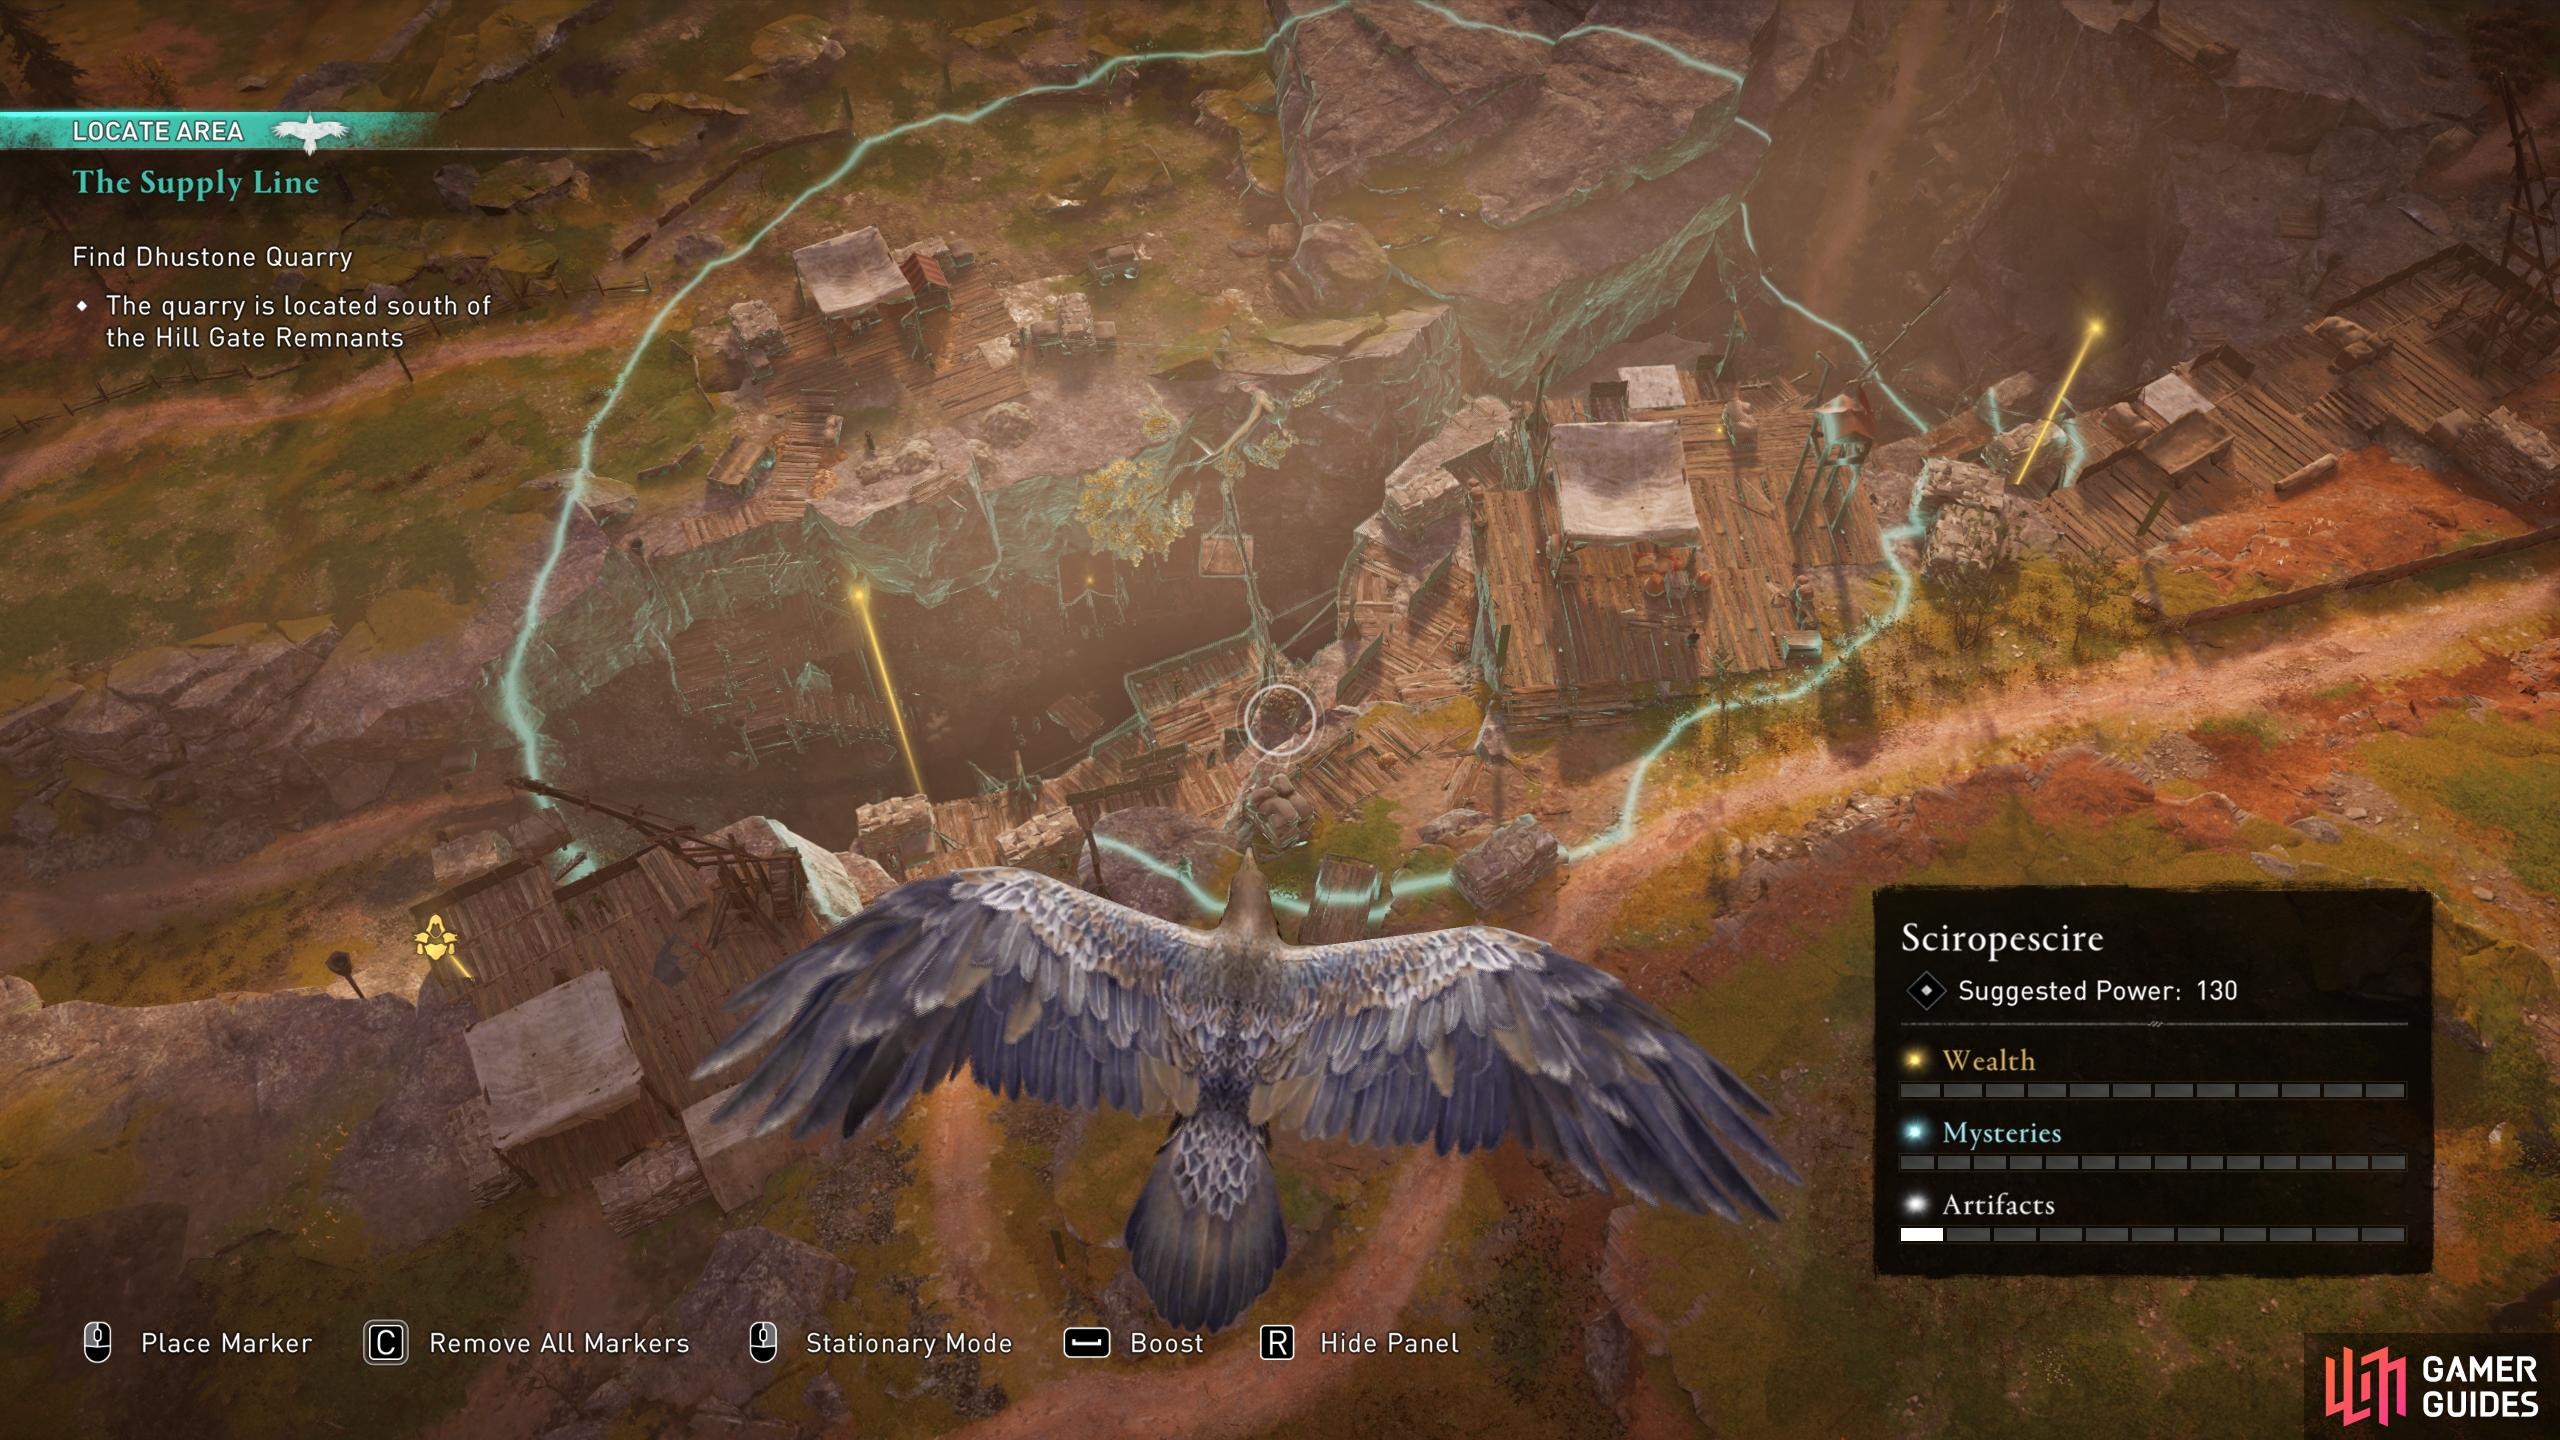 Use your raven to scout Dhustone Quarry as you approach it.